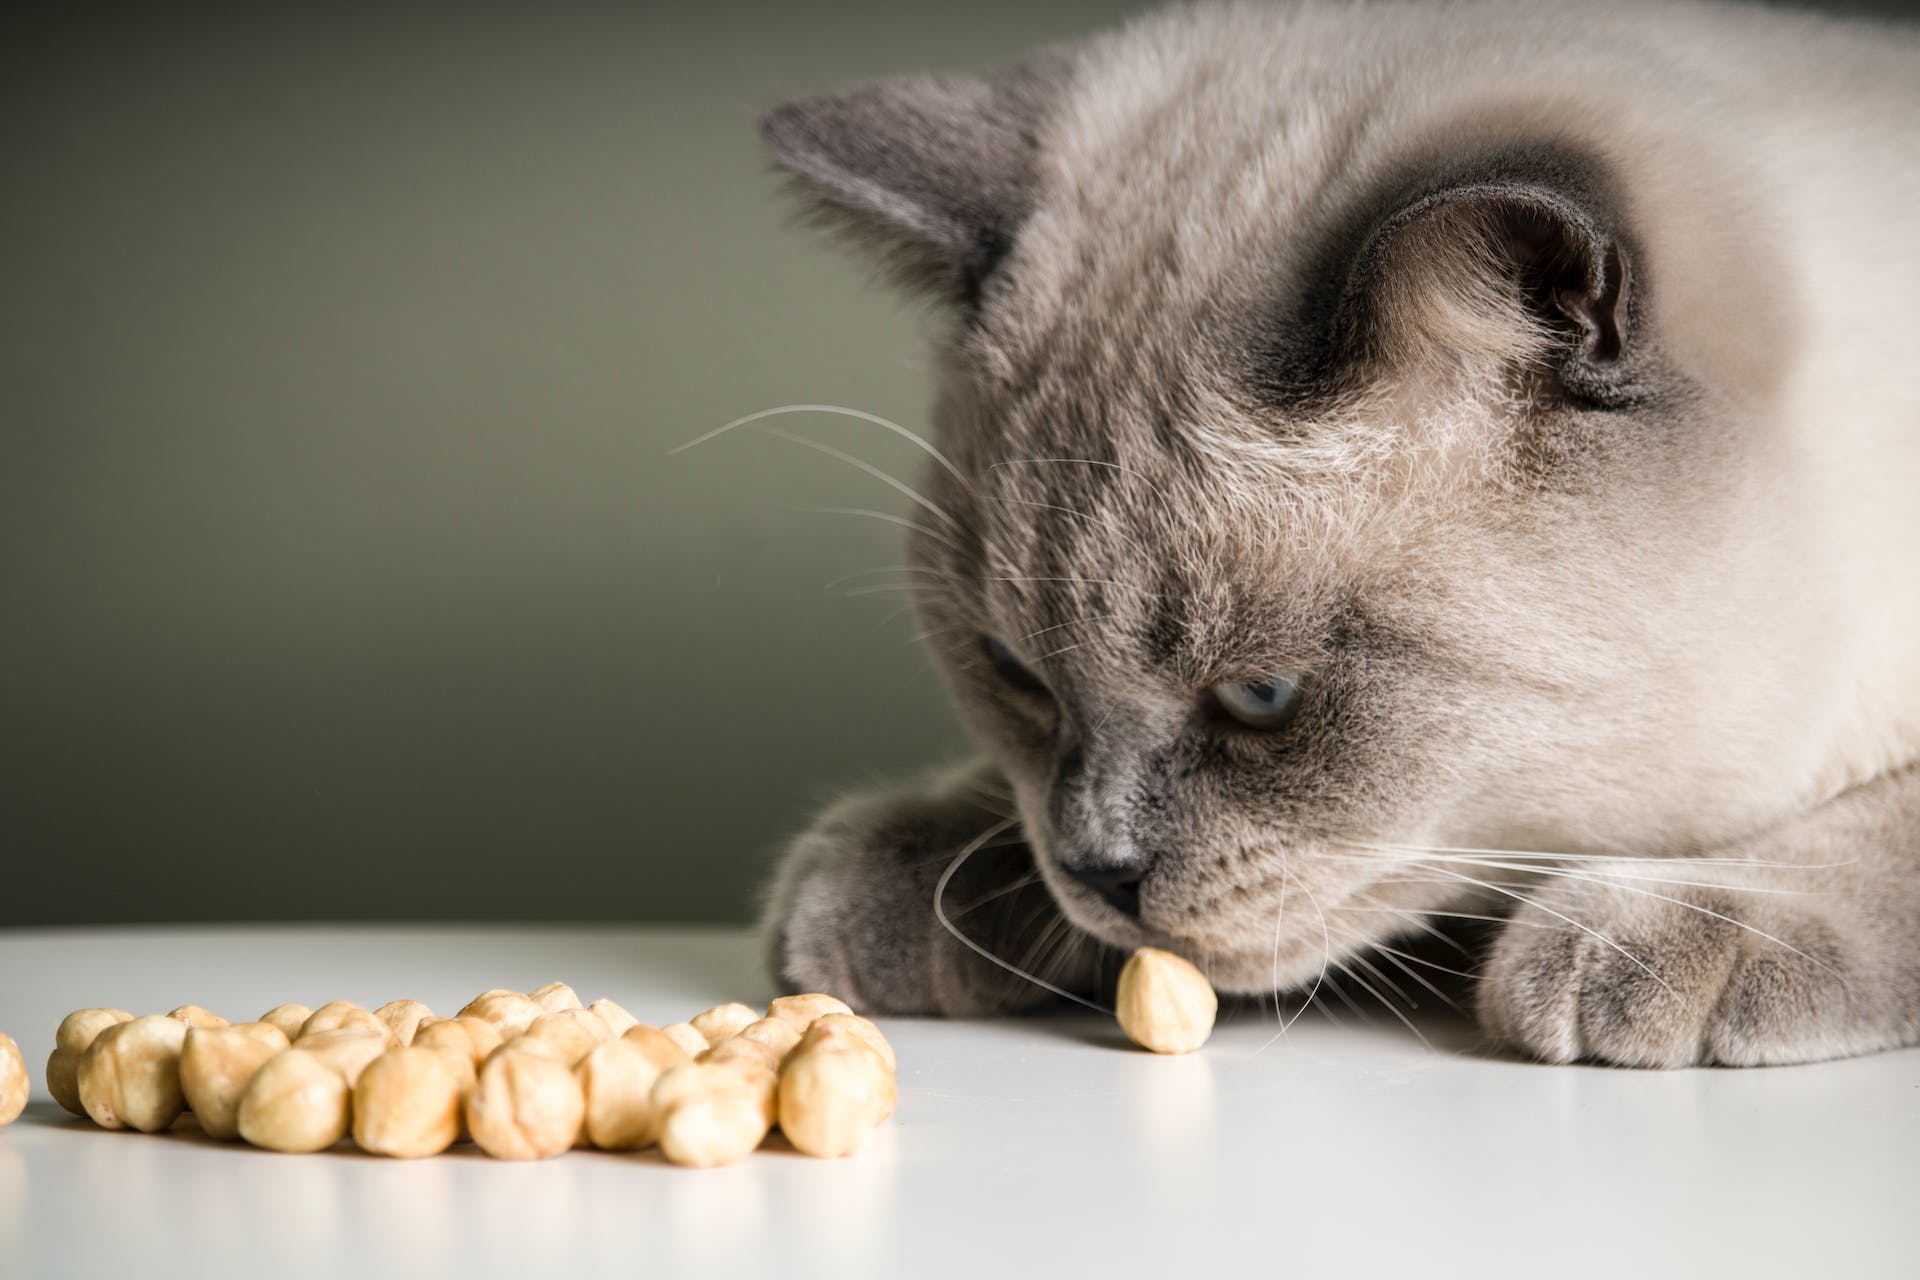 A cat sniffing nuts on a kitchen table